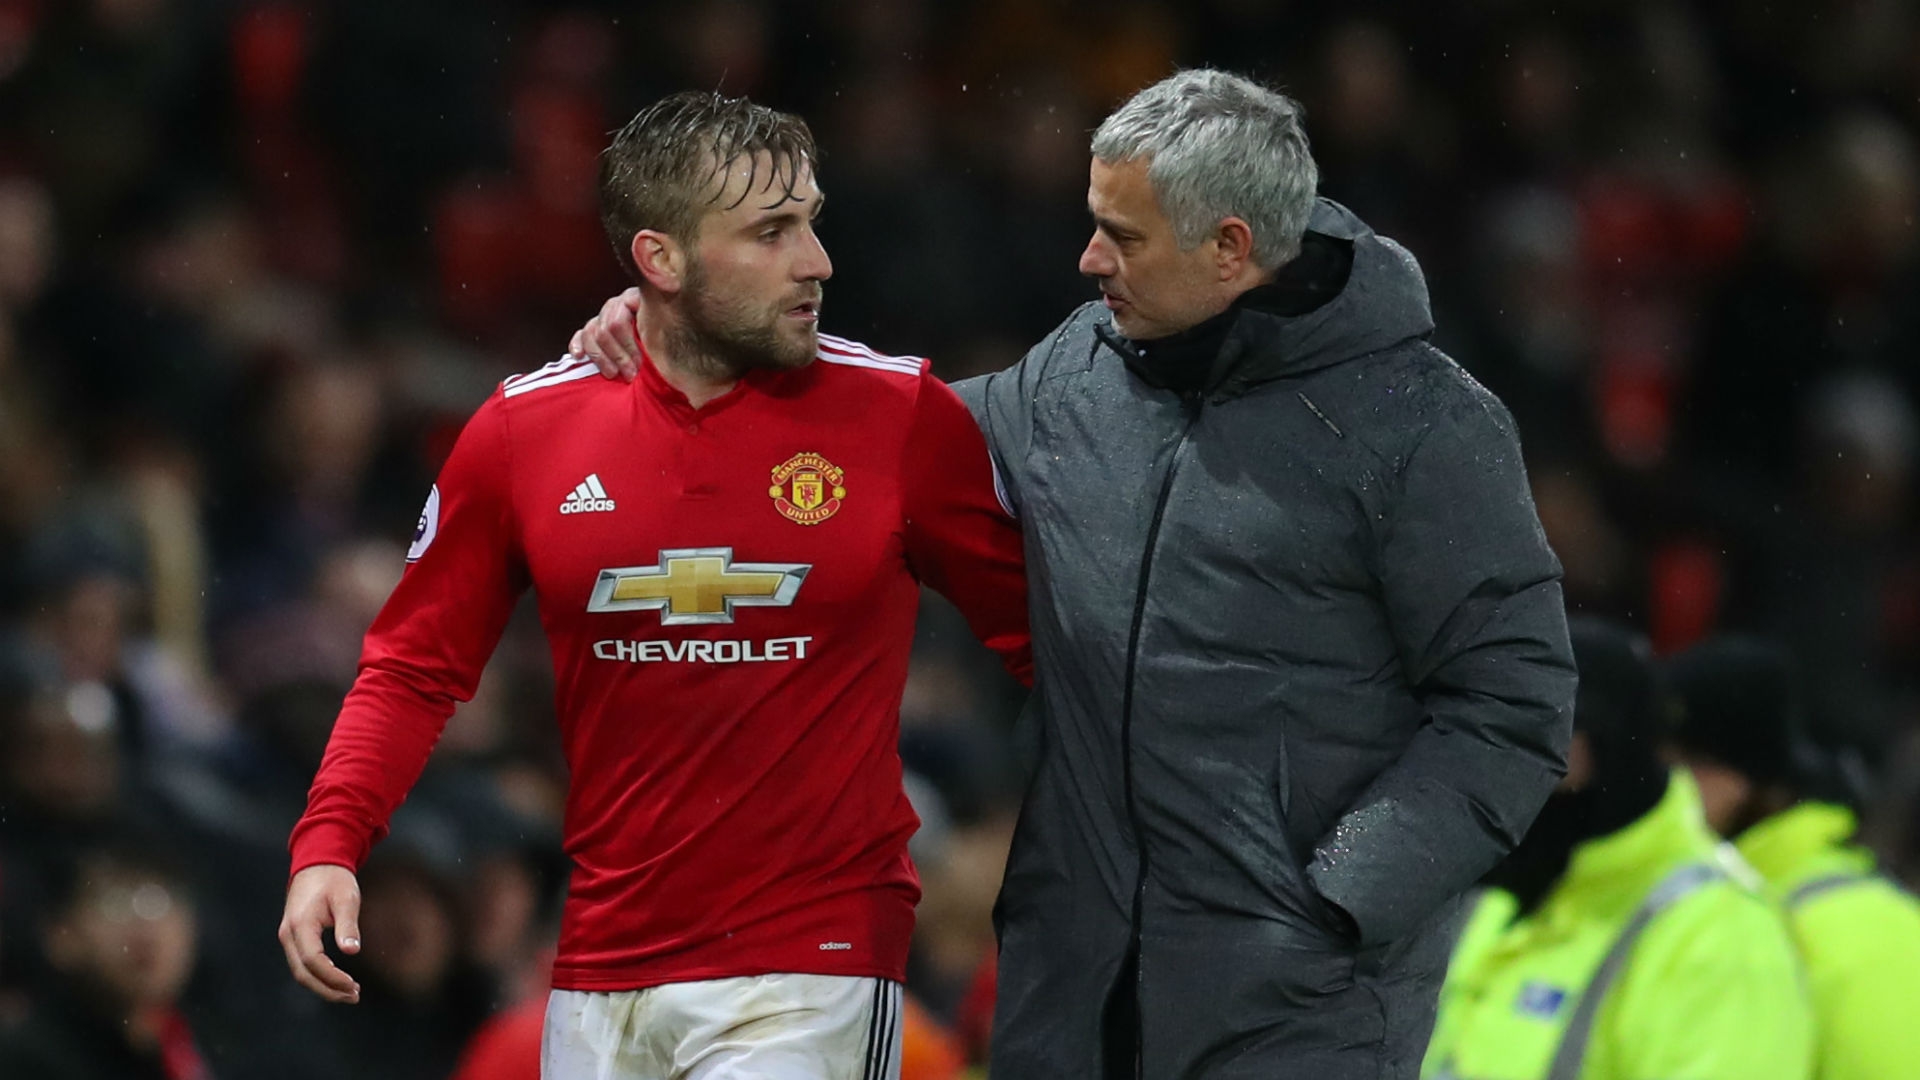 Jose Mourinho has expressed fresh criticism at his players. Luke Shaw was once again singled out